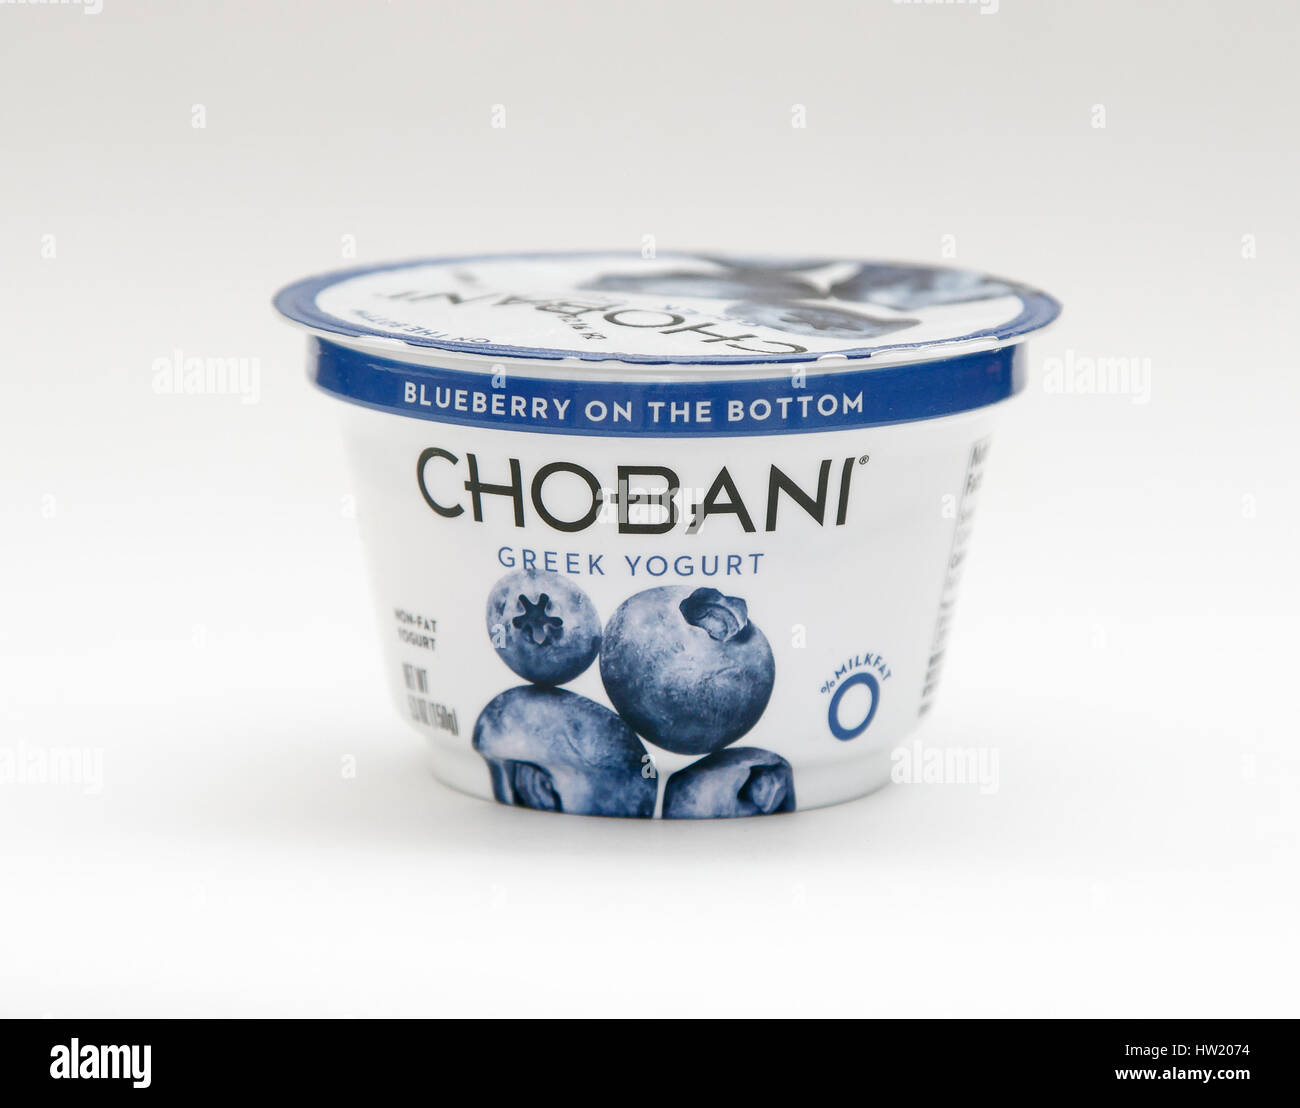 Container of blueberry Chobani Greek yogurt stands against white background. Stock Photo